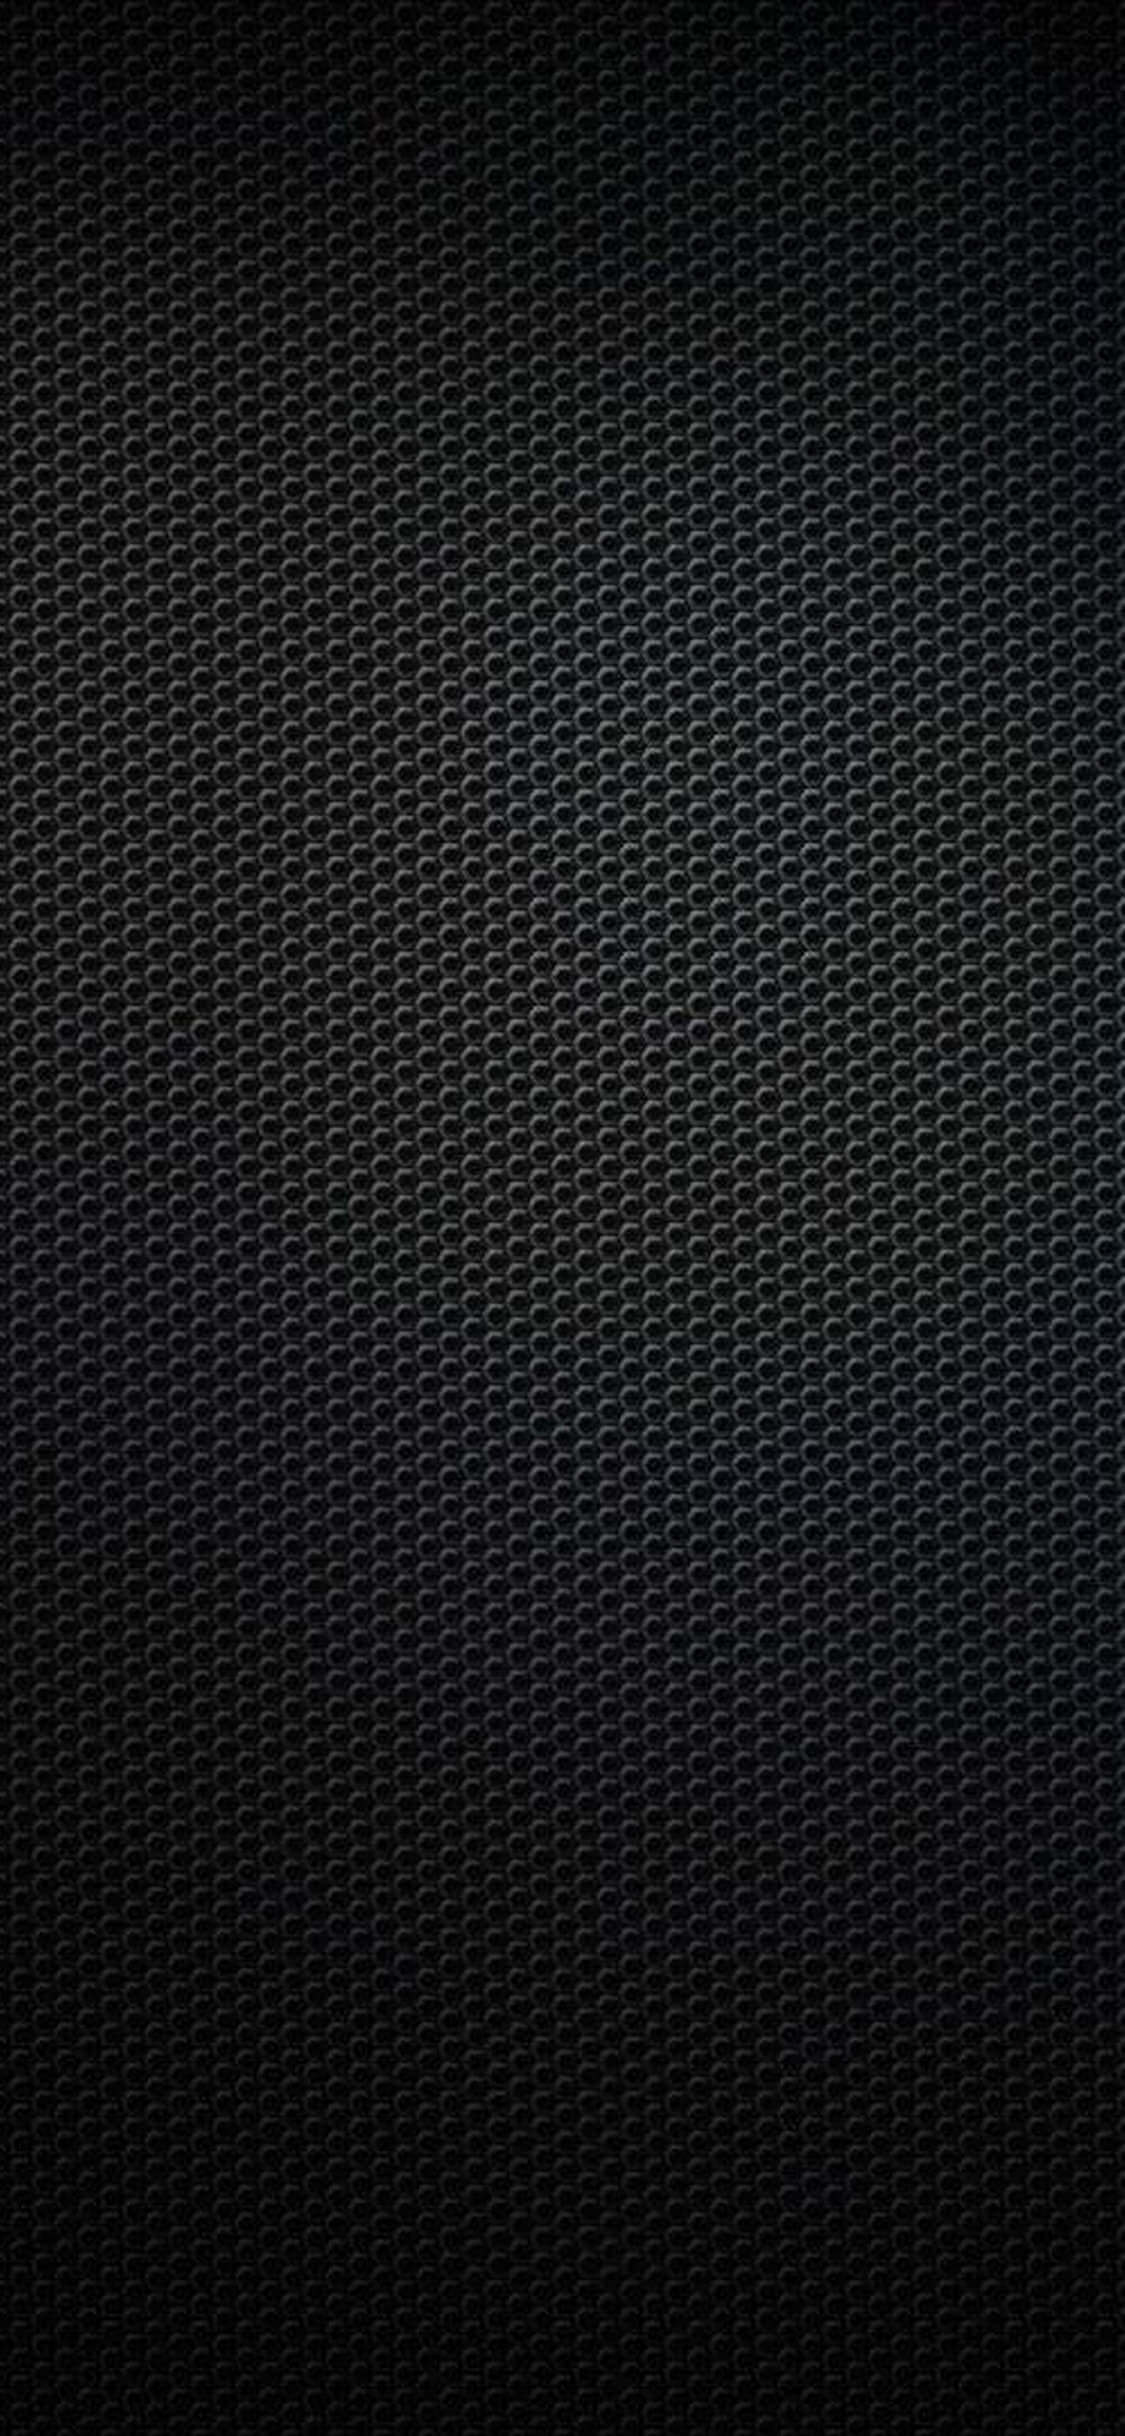 50+ Stunning Black Wallpapers For Your iPhone